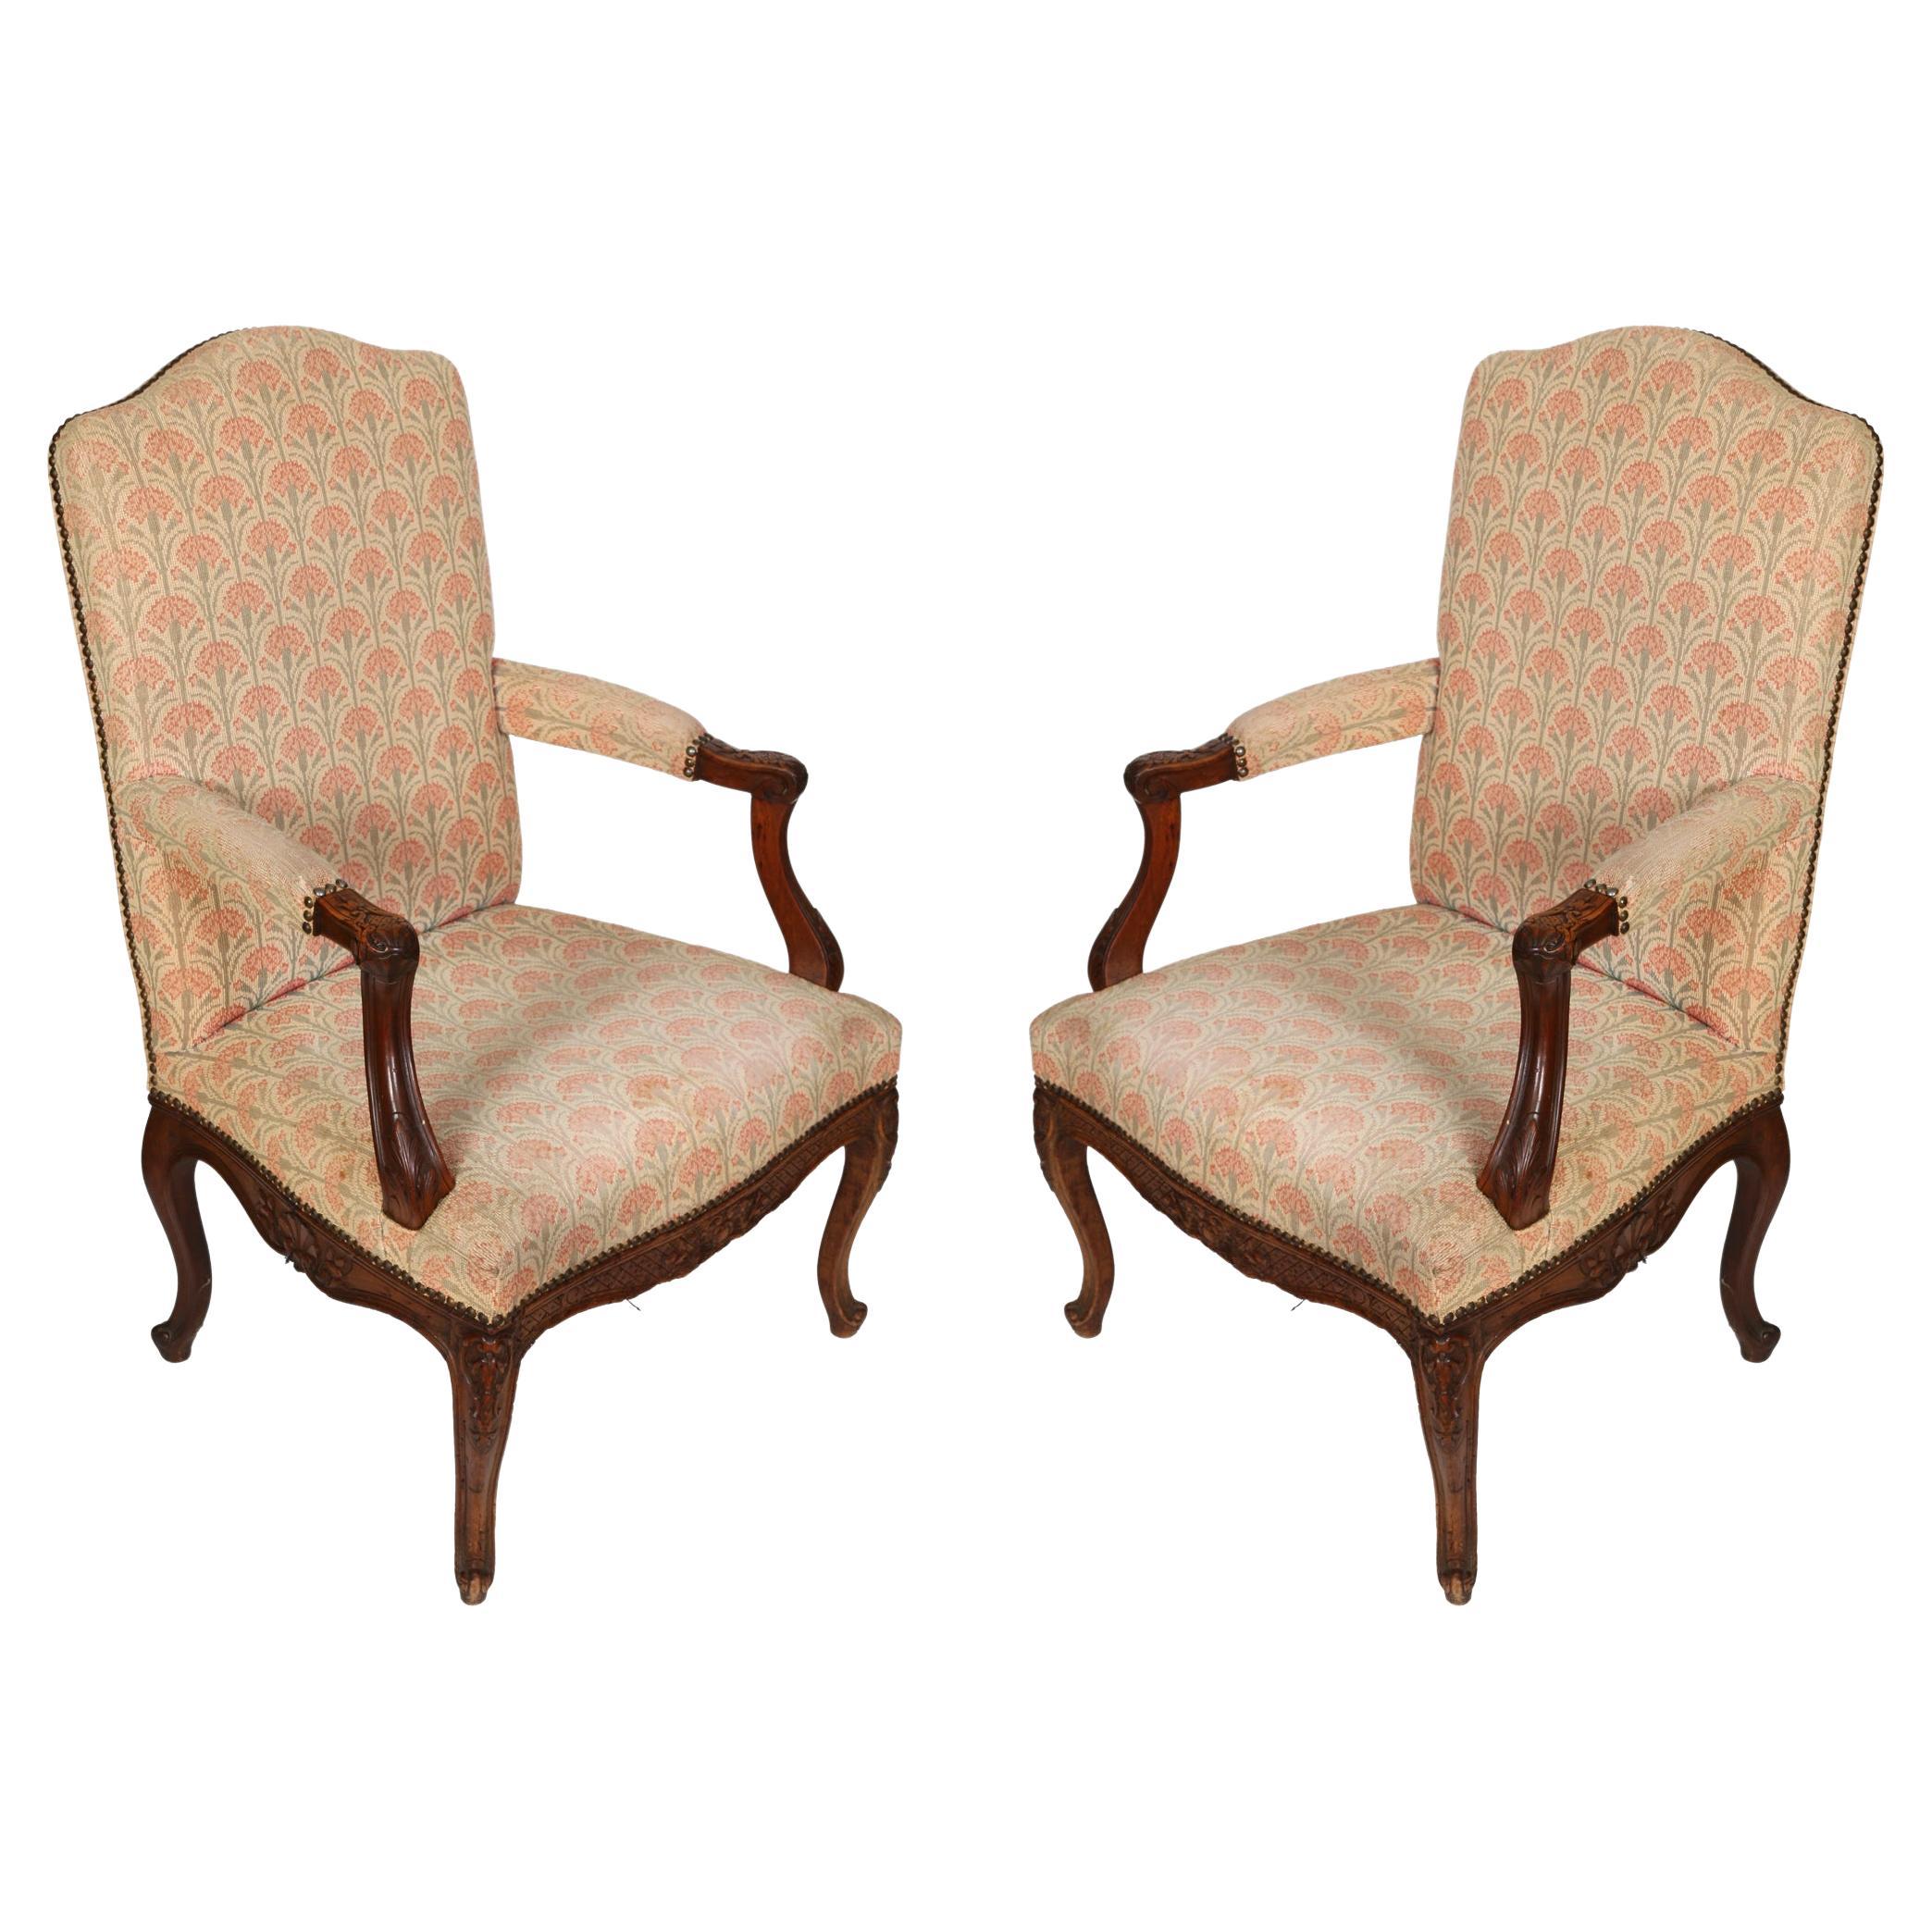 Pair of Regence Walnut Fauteuils in Carnation Petit Point Tapestry